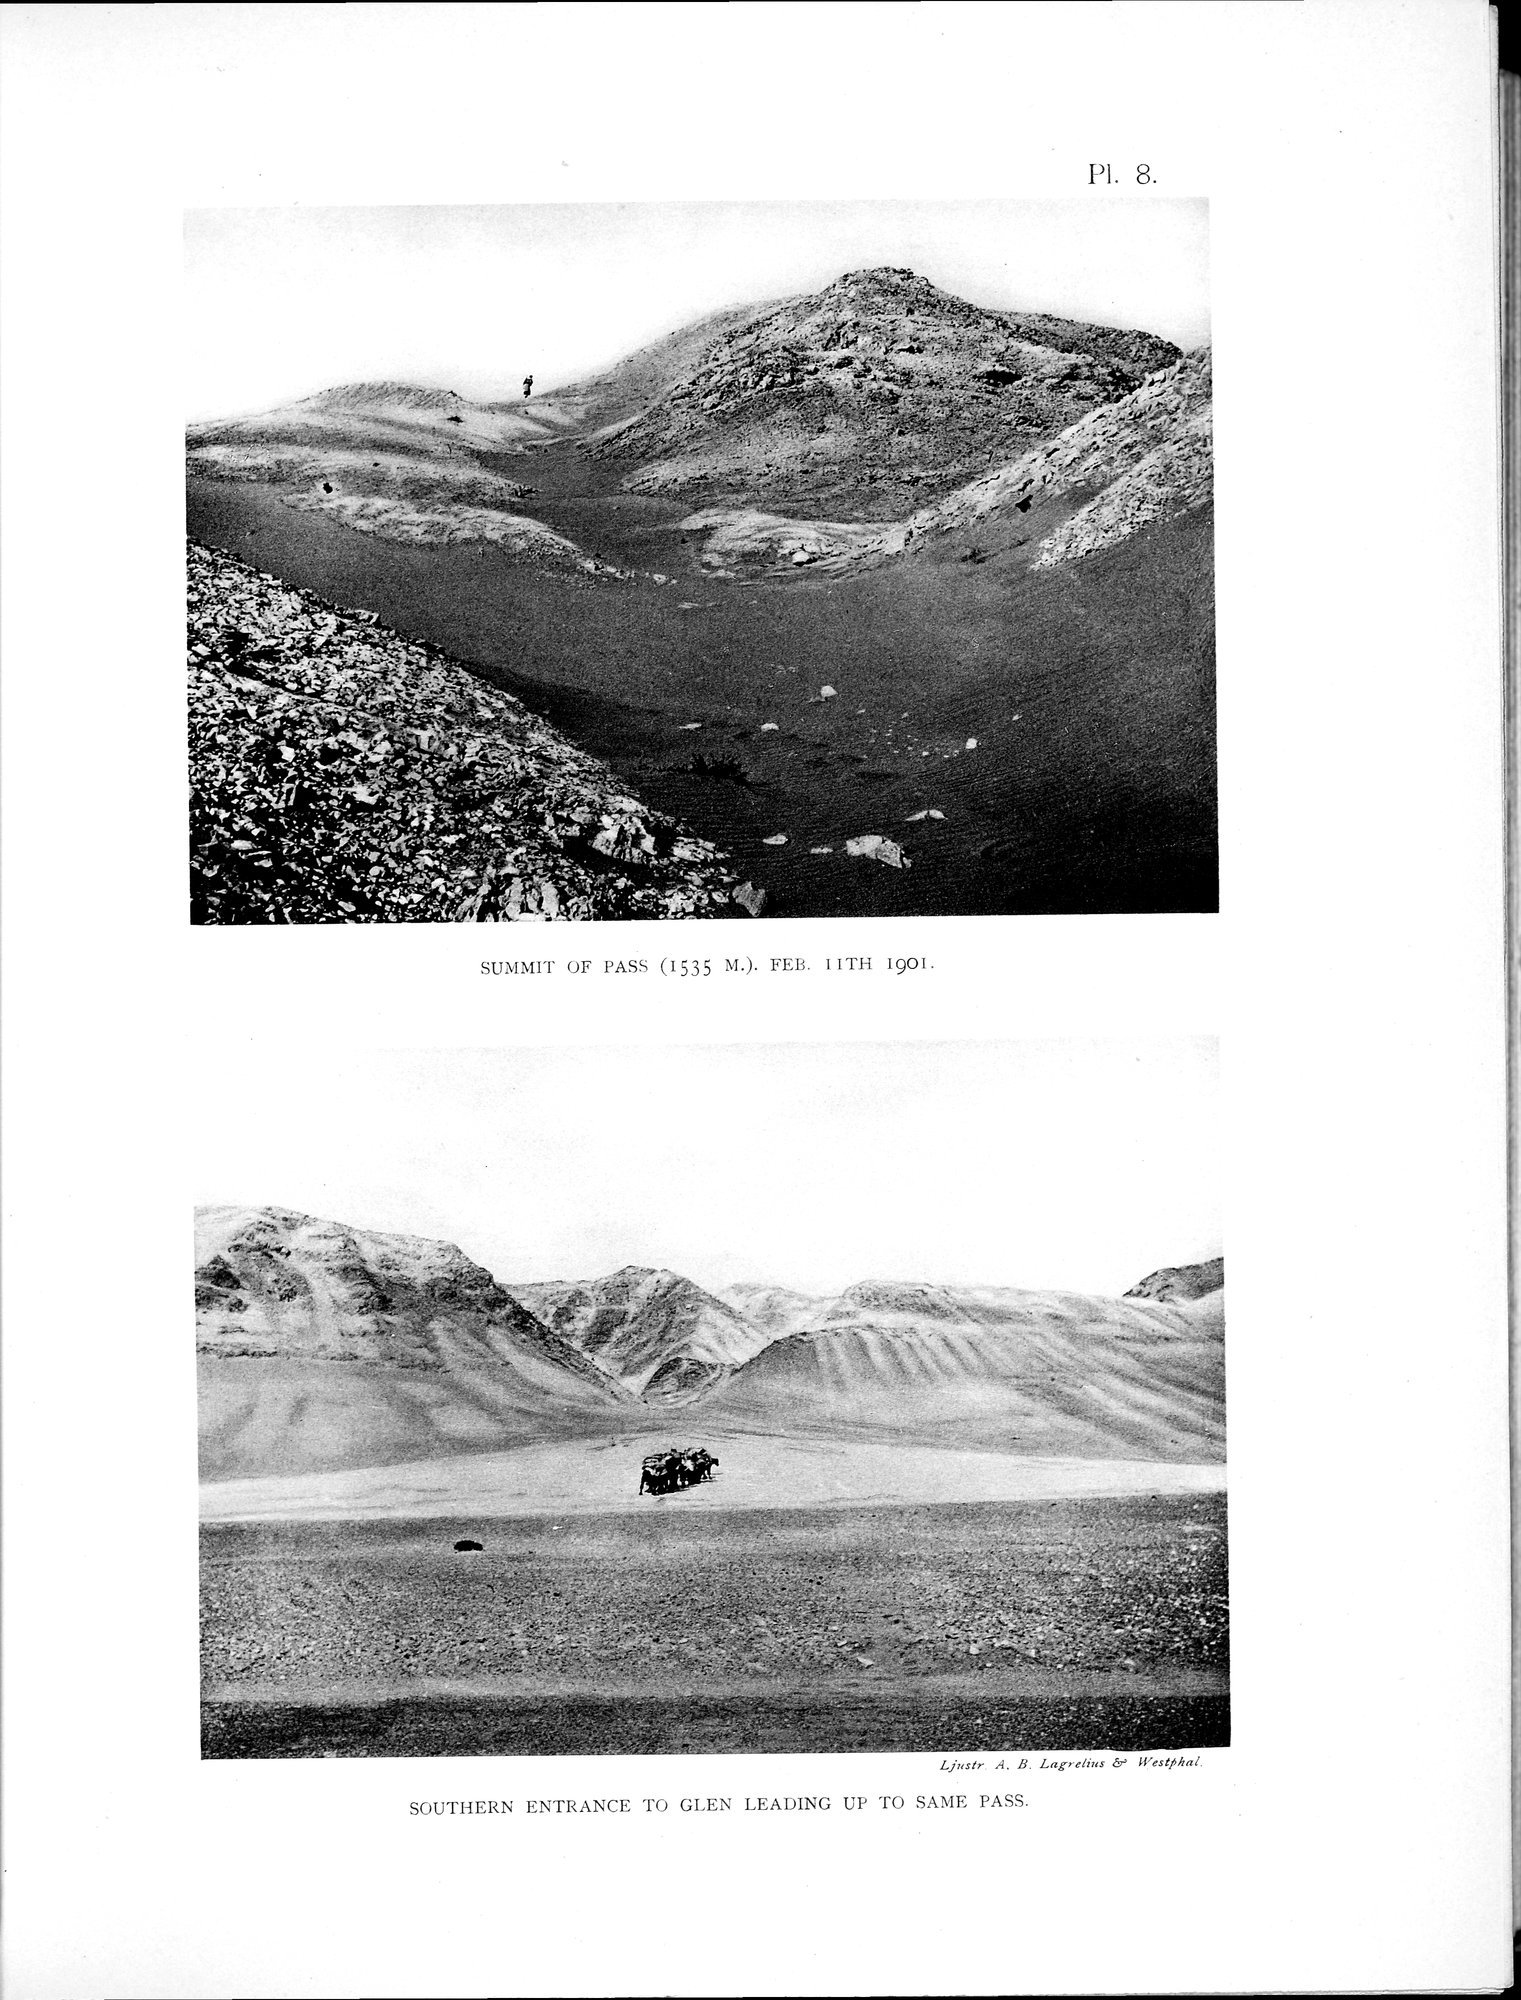 Scientific Results of a Journey in Central Asia, 1899-1902 : vol.2 / 135 ページ（白黒高解像度画像）